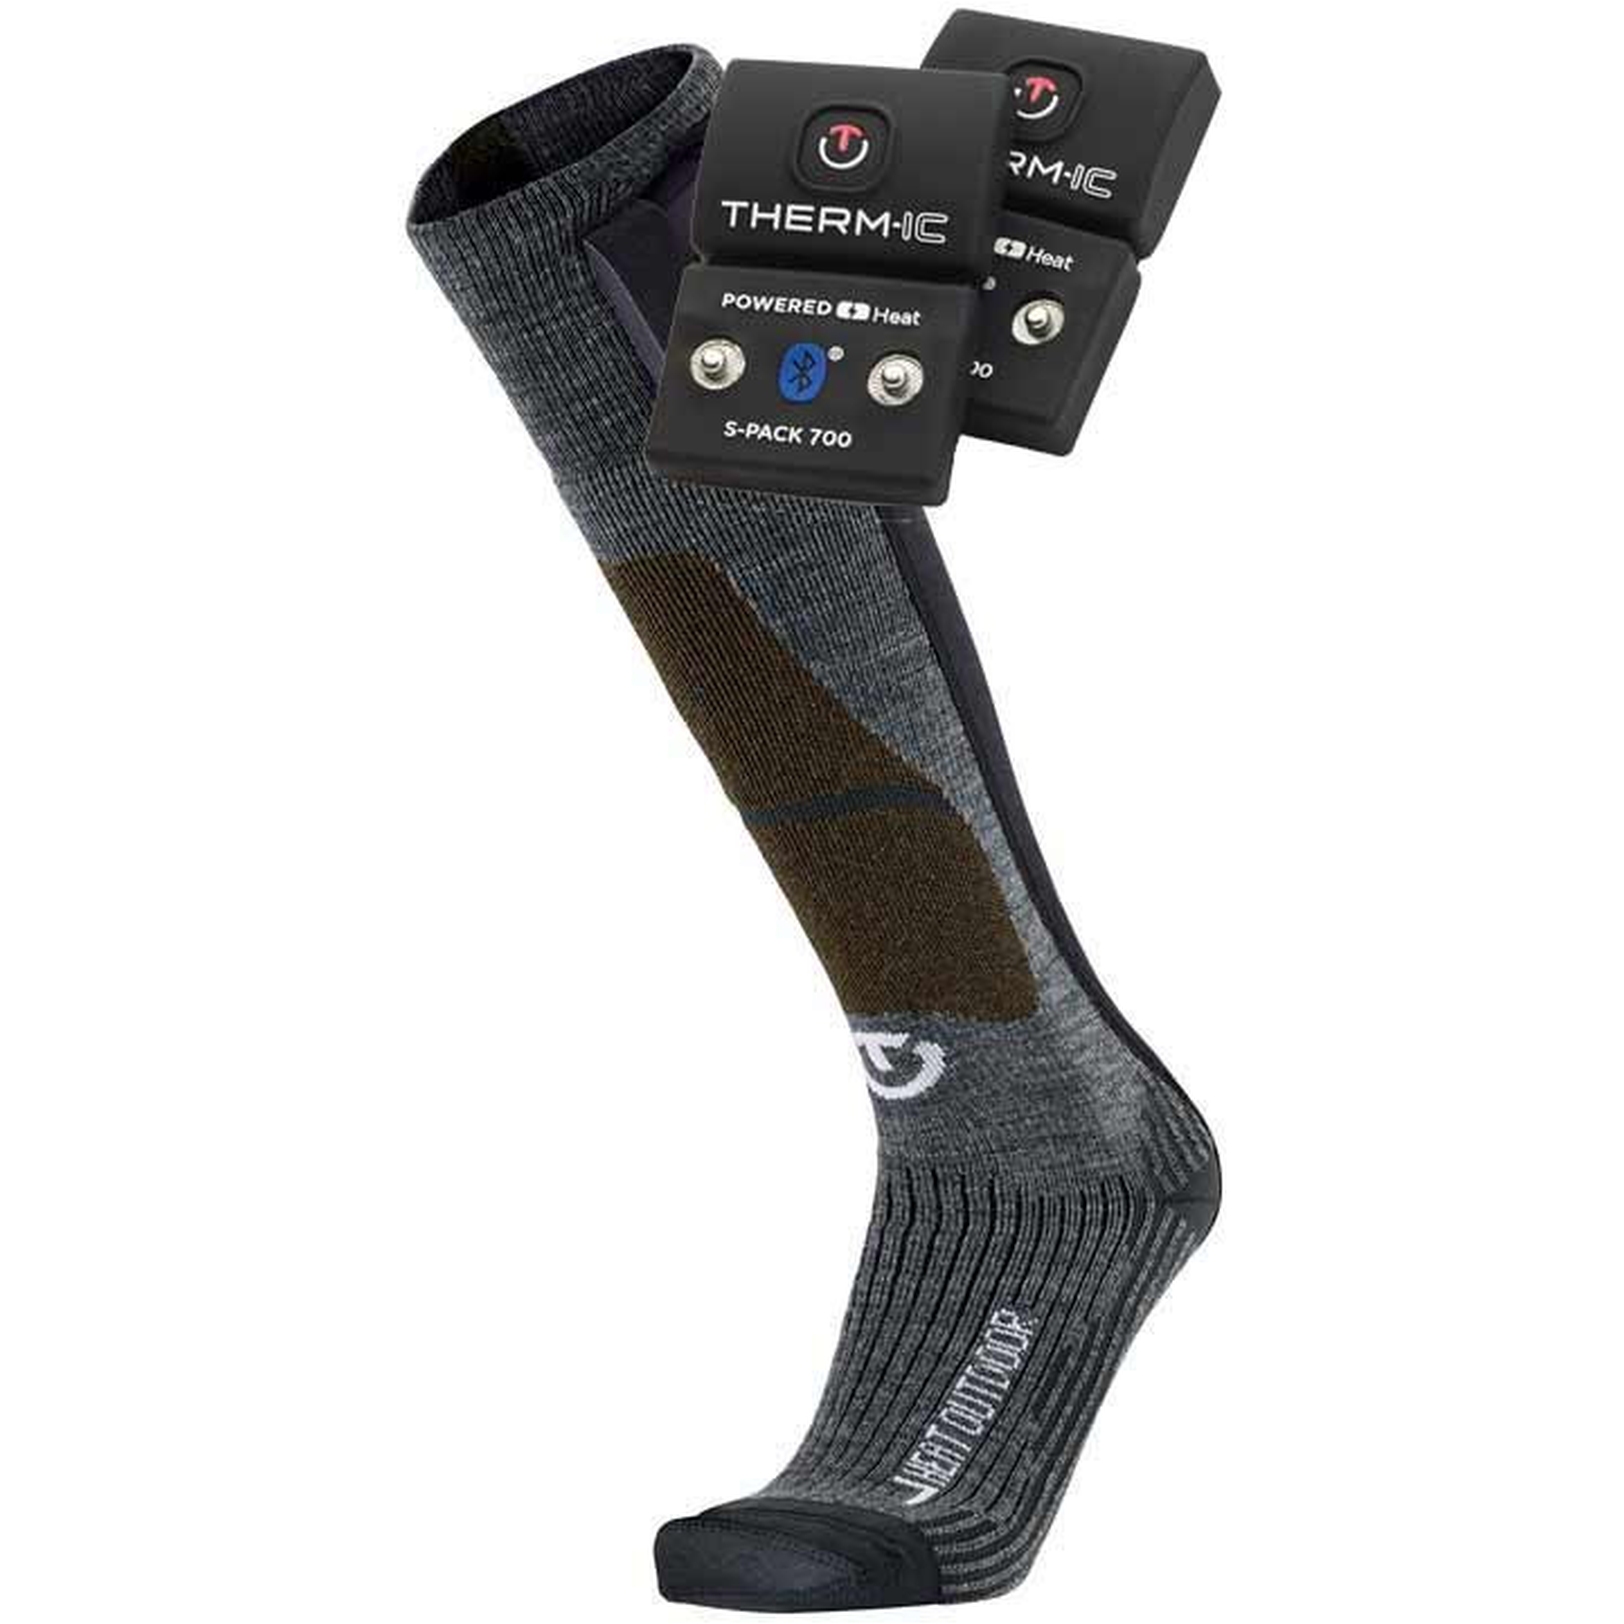 Productfoto van therm-ic Powersock Set - Heat Fusion Outdoor Socks + S-Pack 700 BT Battery - grey